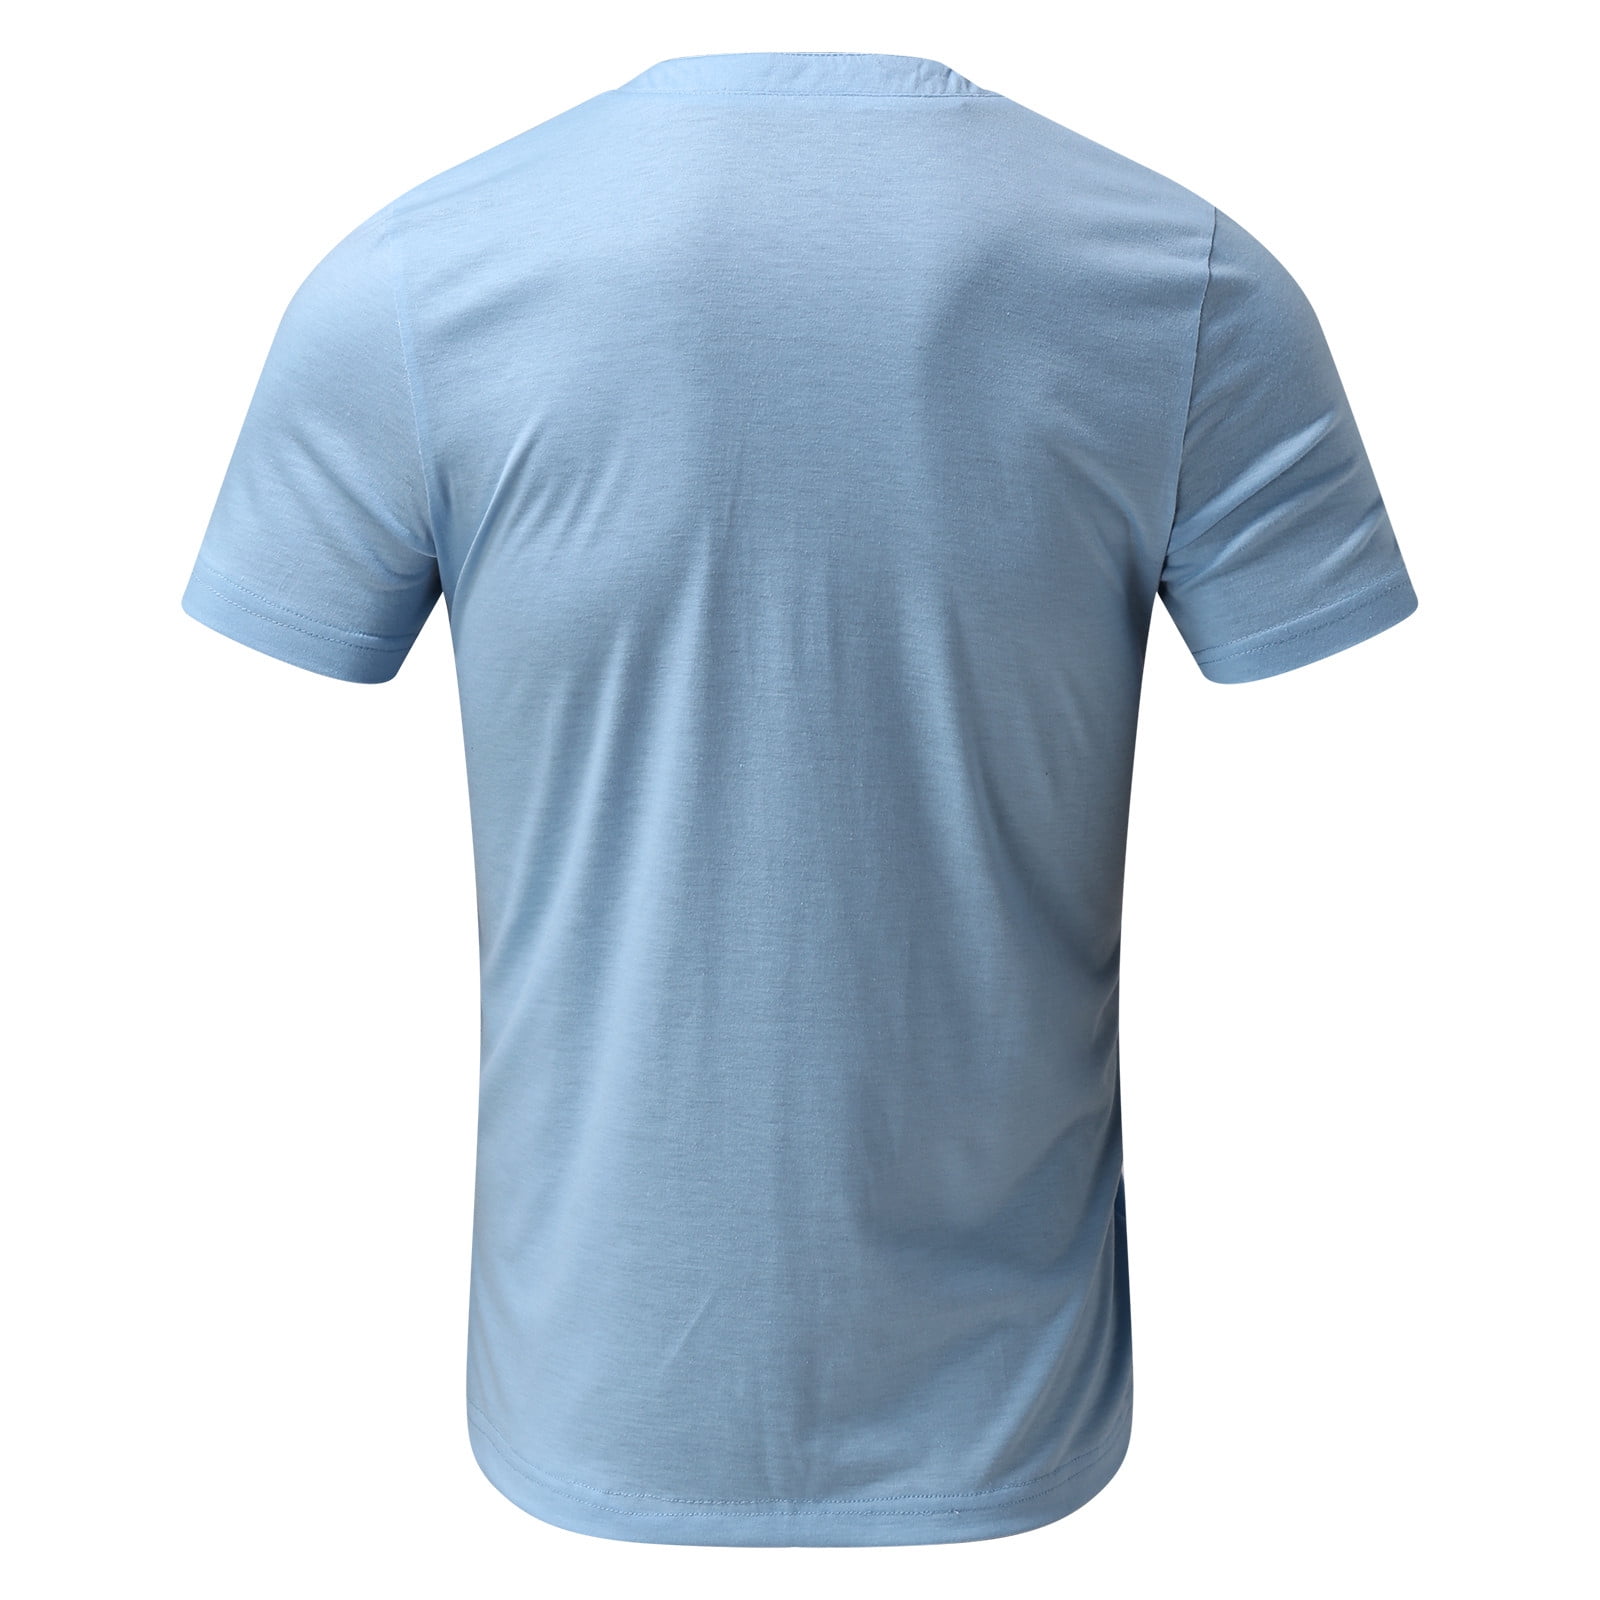 Blue Compression Shirts For Men Men Summer Casual O Neck Solid Button Short  Sleeve Tee Shirt Top Blouse 